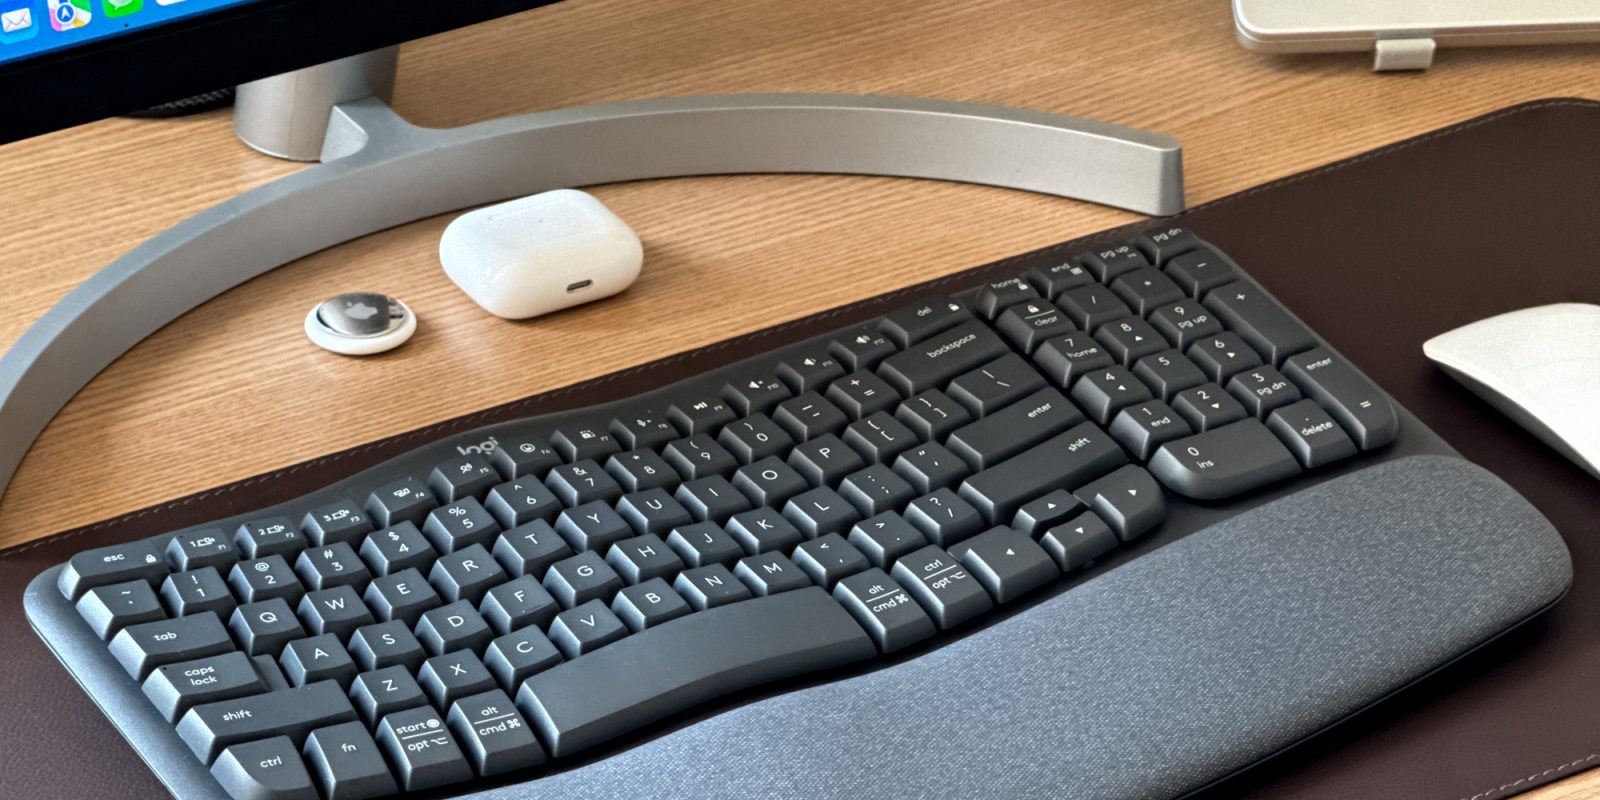 Logitech's Wave Keys is a new ergonomic keyboard that works great with the Mac